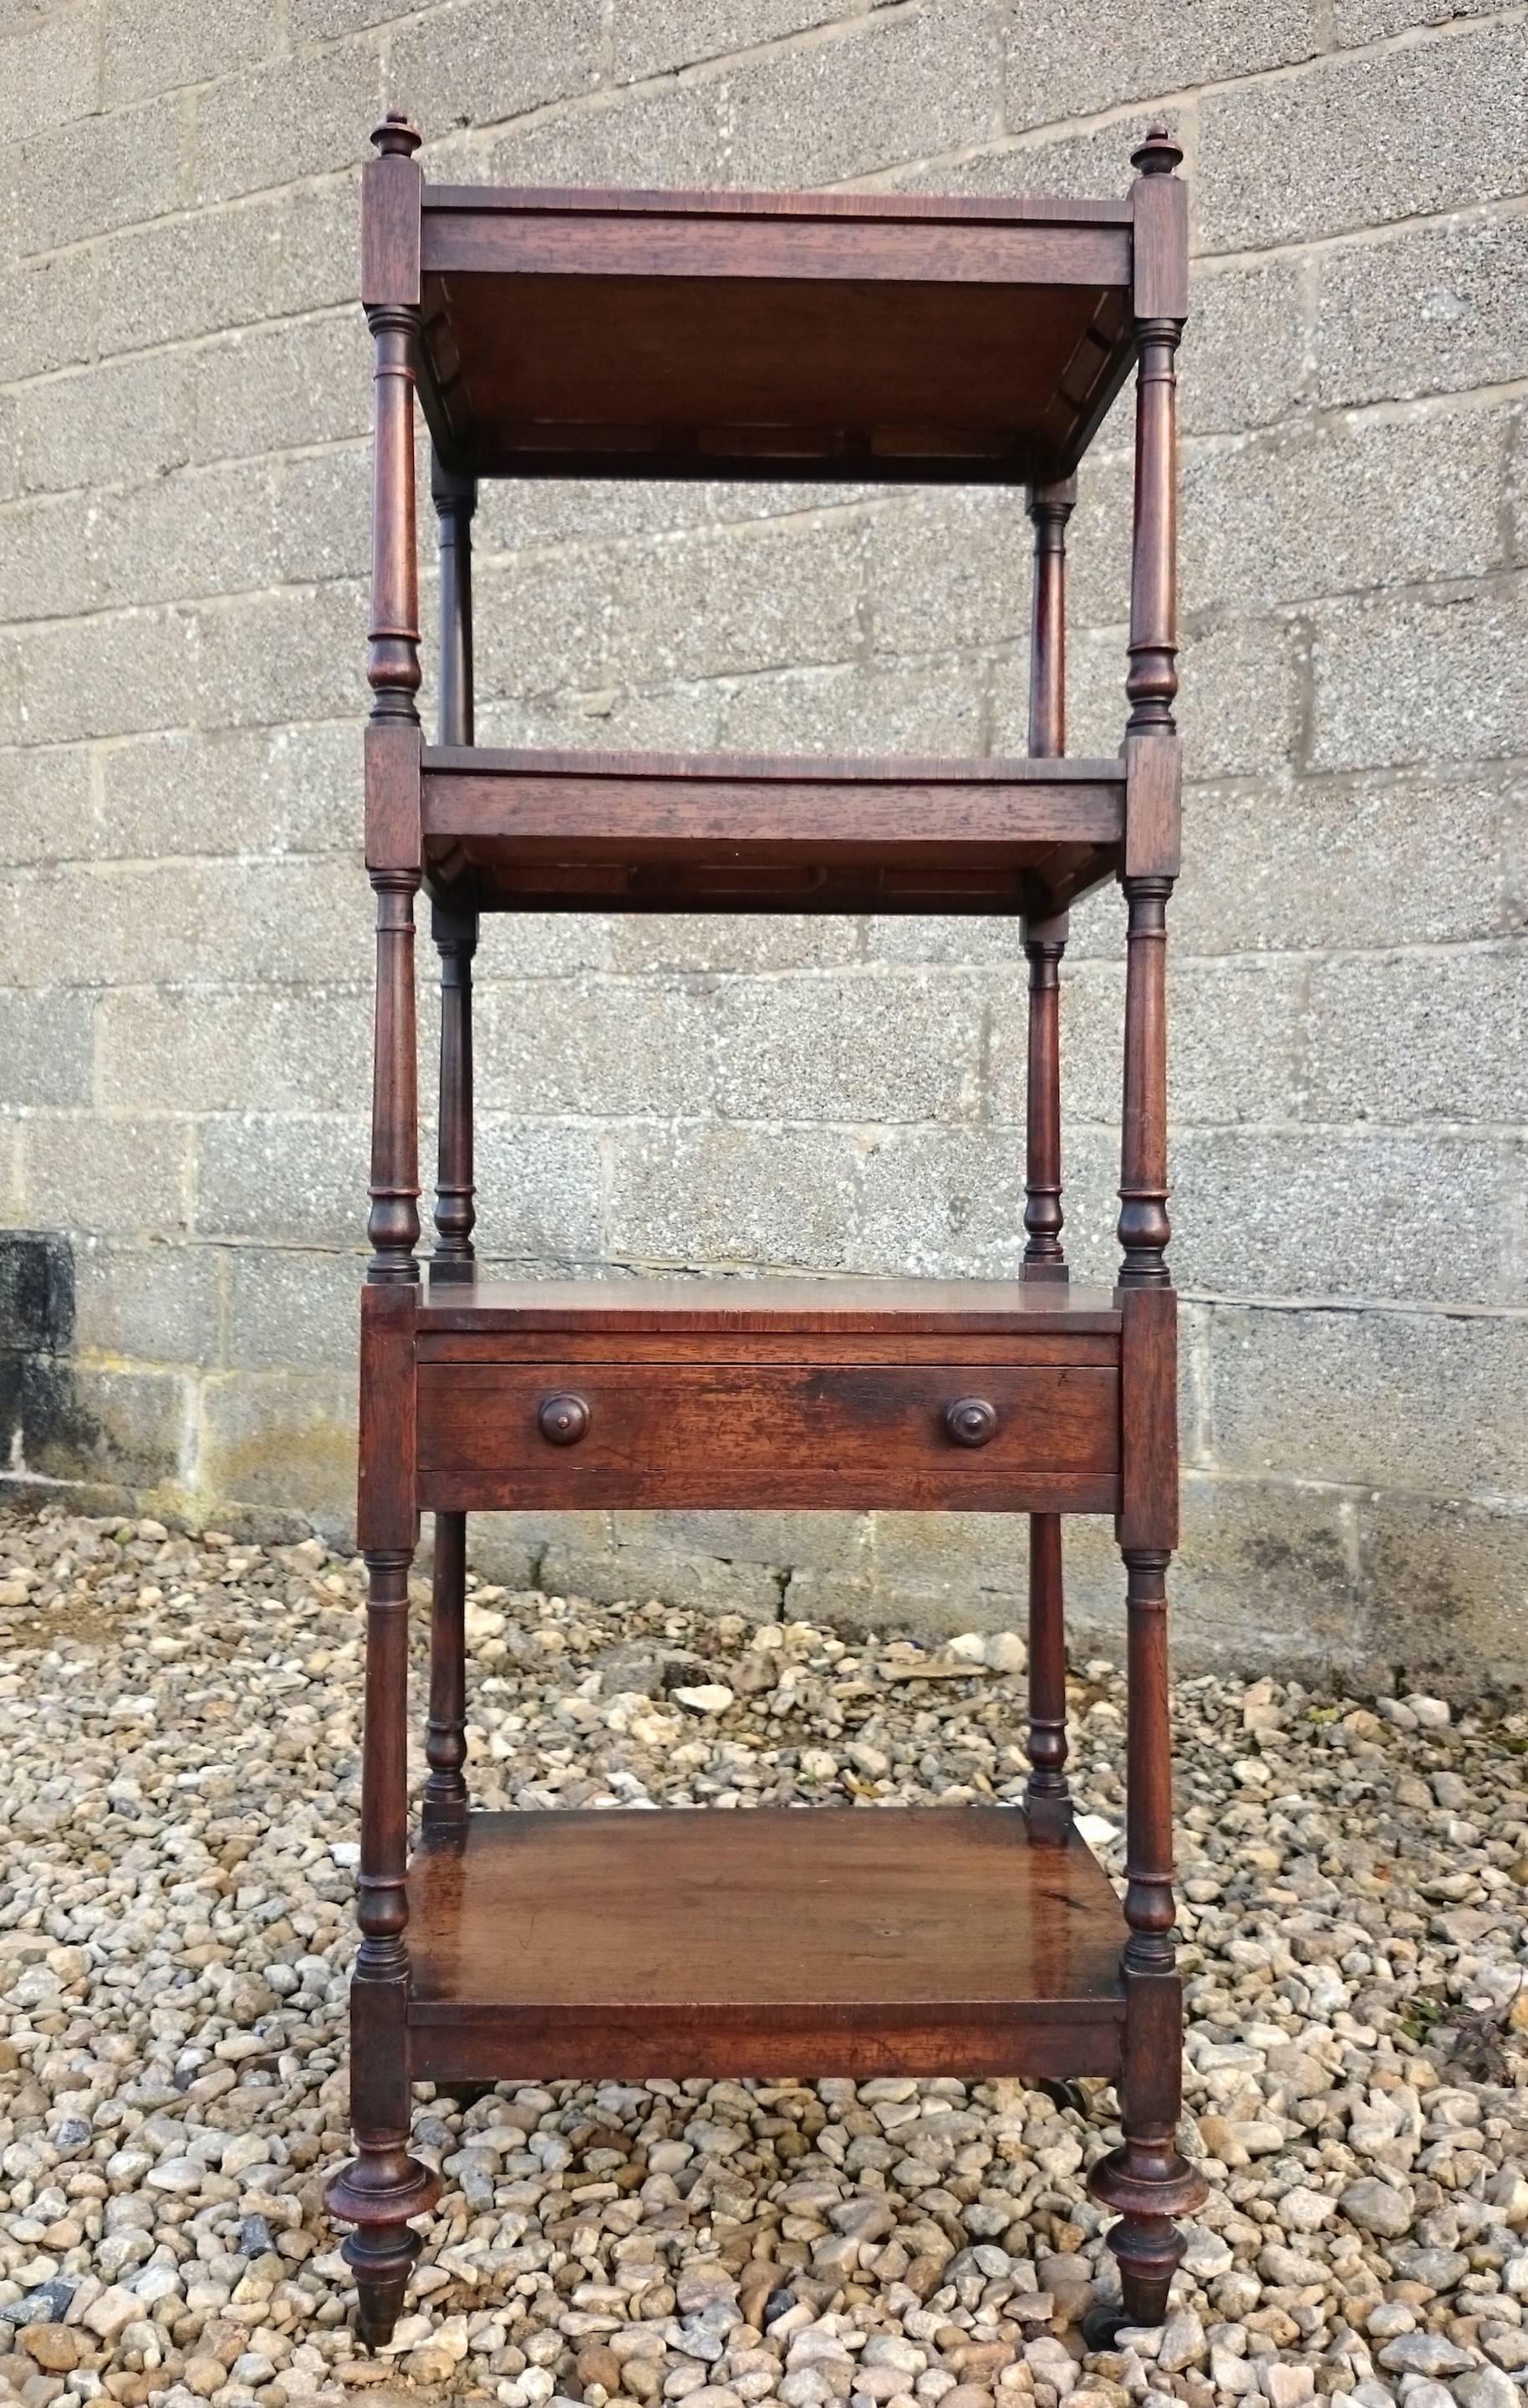 Antique whatnot made of rosewood that has faded to a pale honey colour over its long life. This can be even further improved with beeswax which will be carried out by our in house restoration team. The what not is a useful piece of furniture which